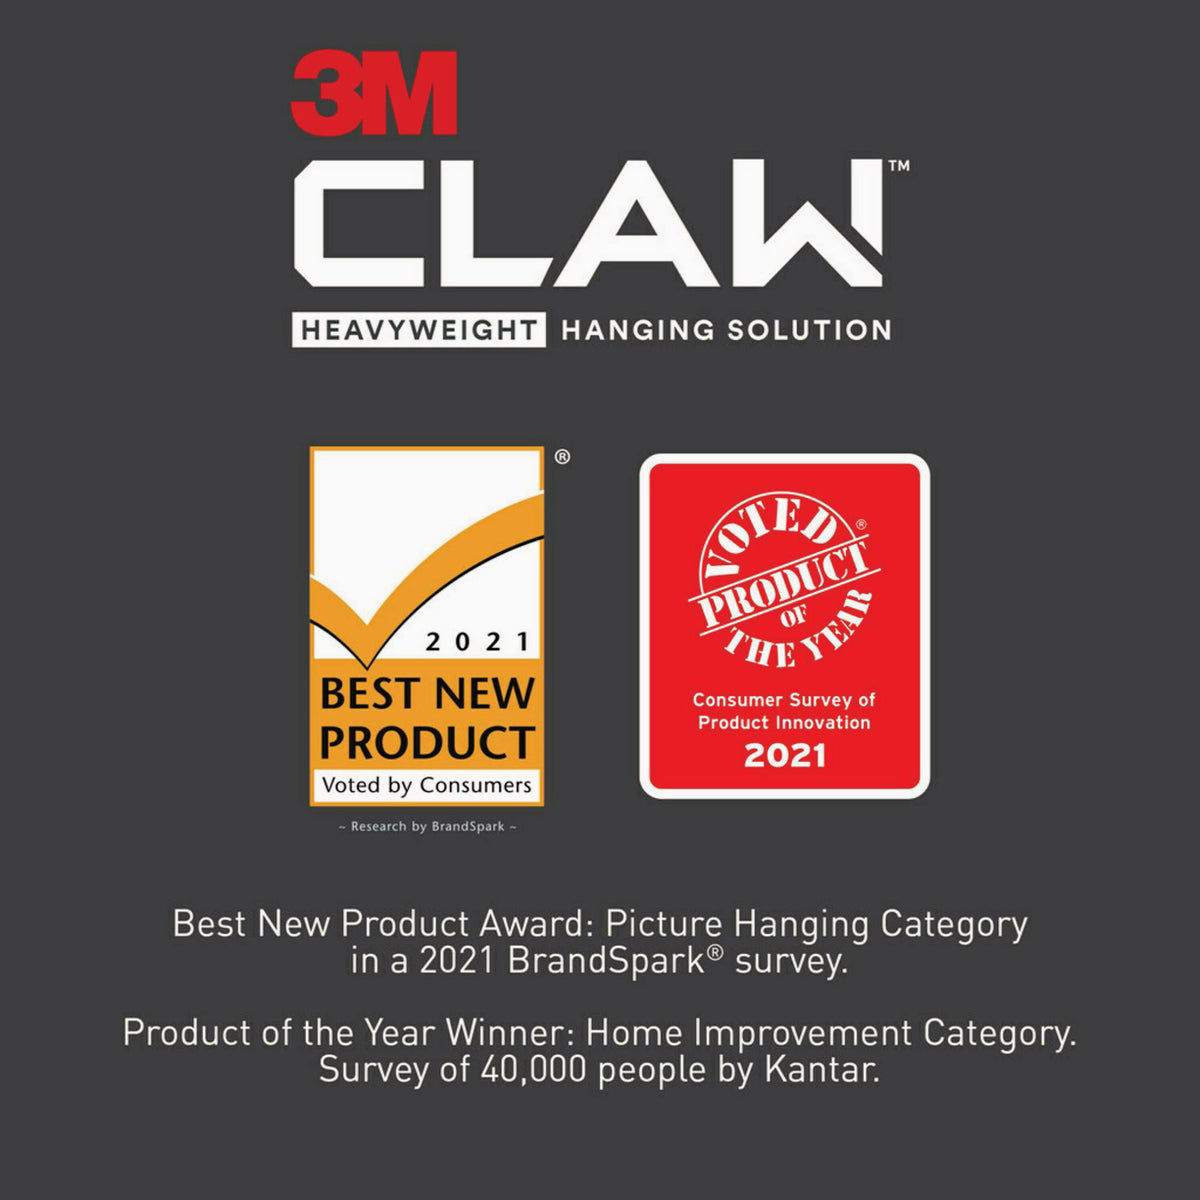 3M Claw Drywall Picture Hanger Variety Pack with Spot Markers